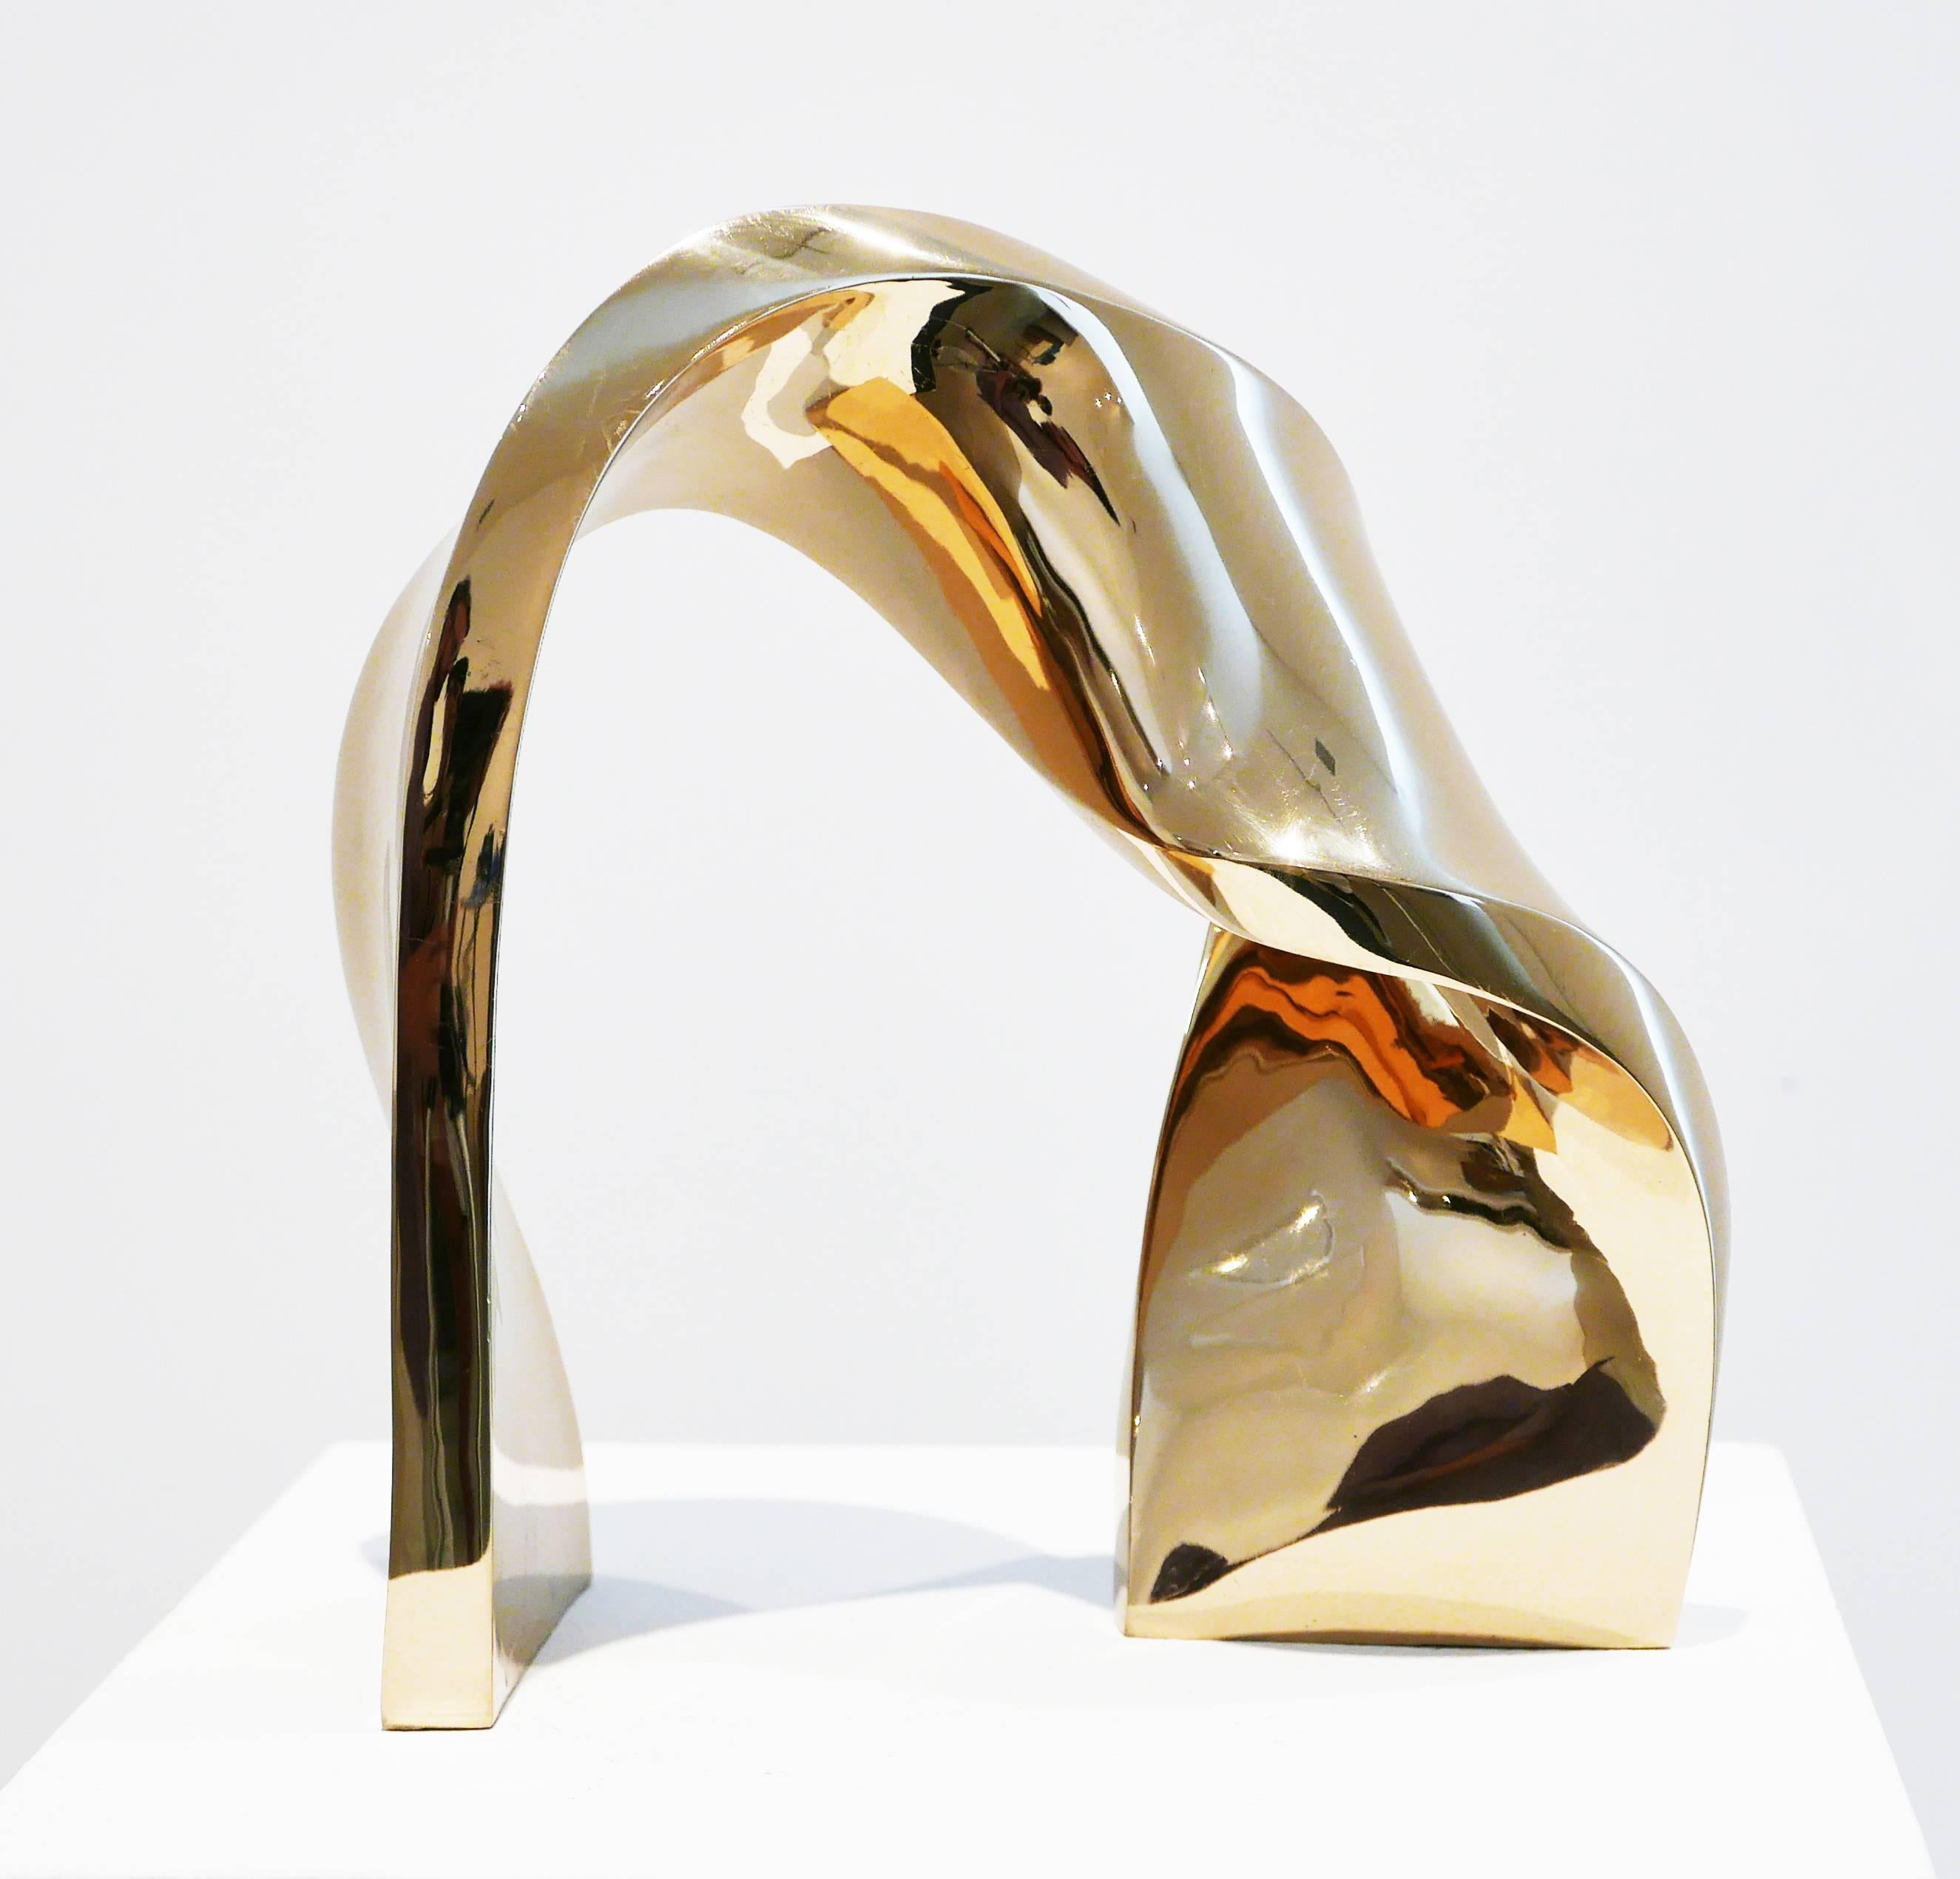 Stephanie Blake Abstract Sculpture - INSTANTANEOUS